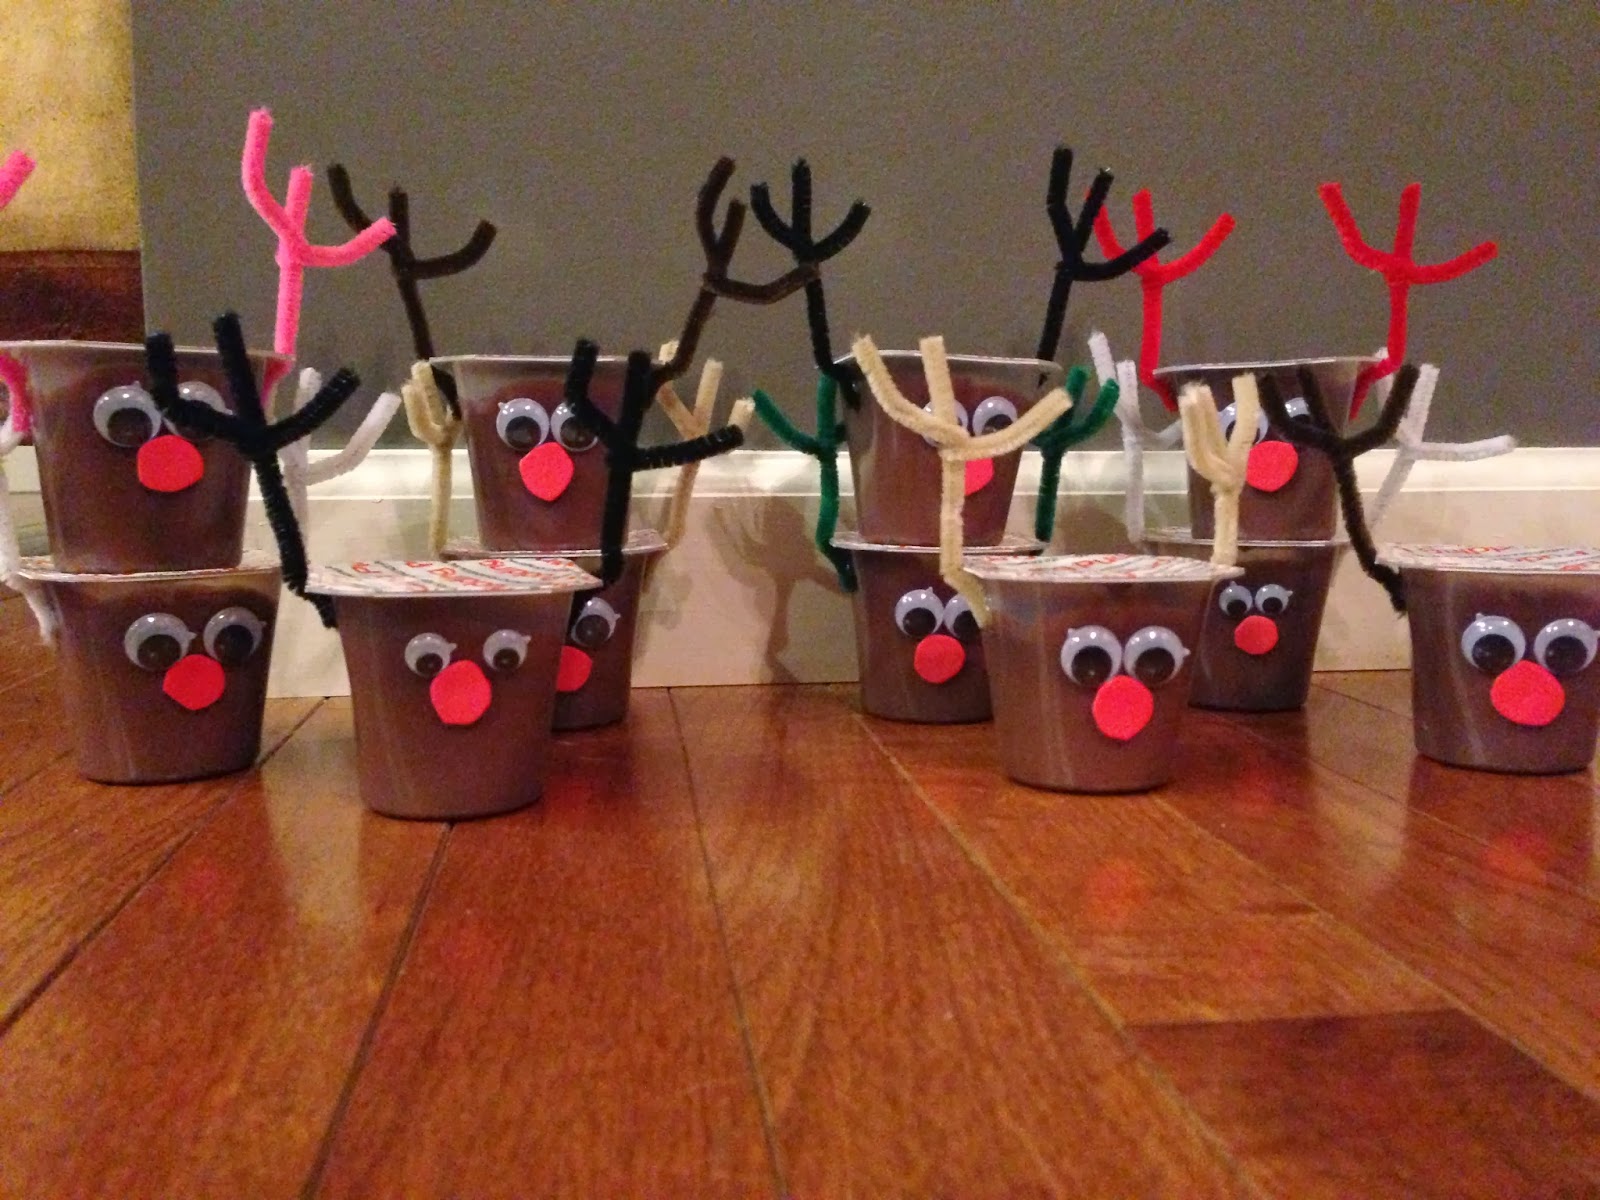 Pudding Reindeer. Just because they're cute!